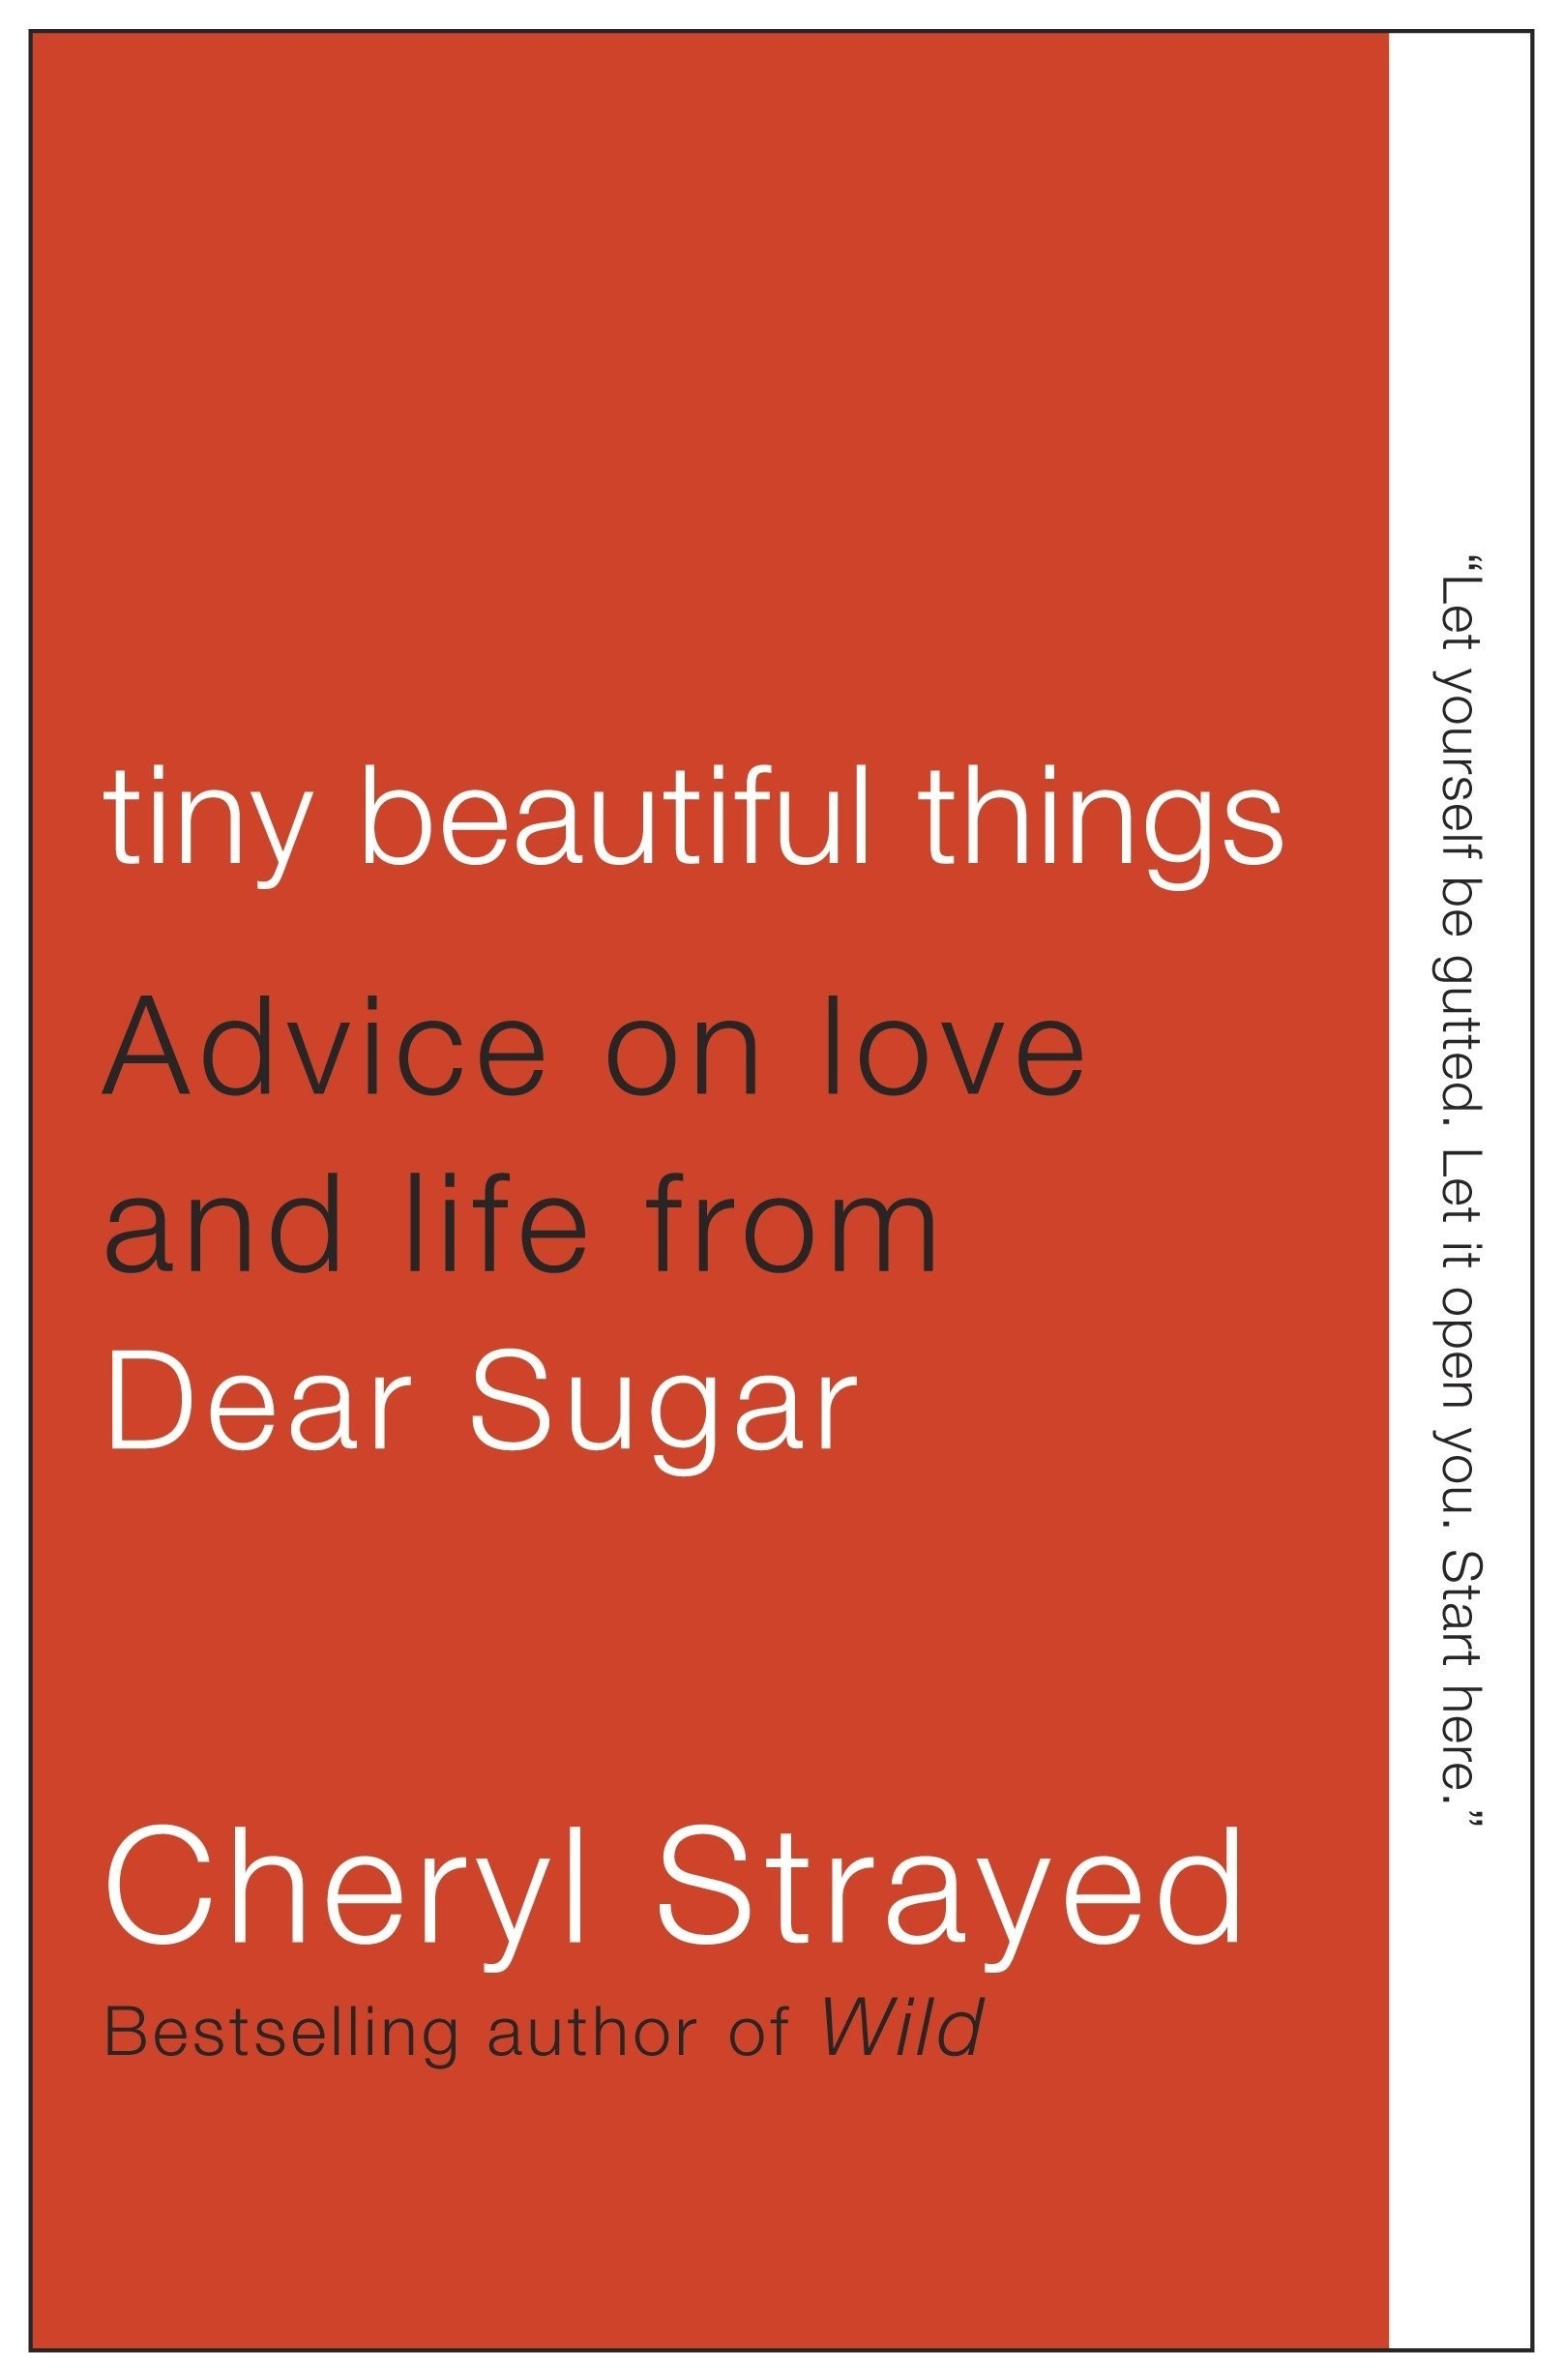 Tiny Beautiful Things book cover